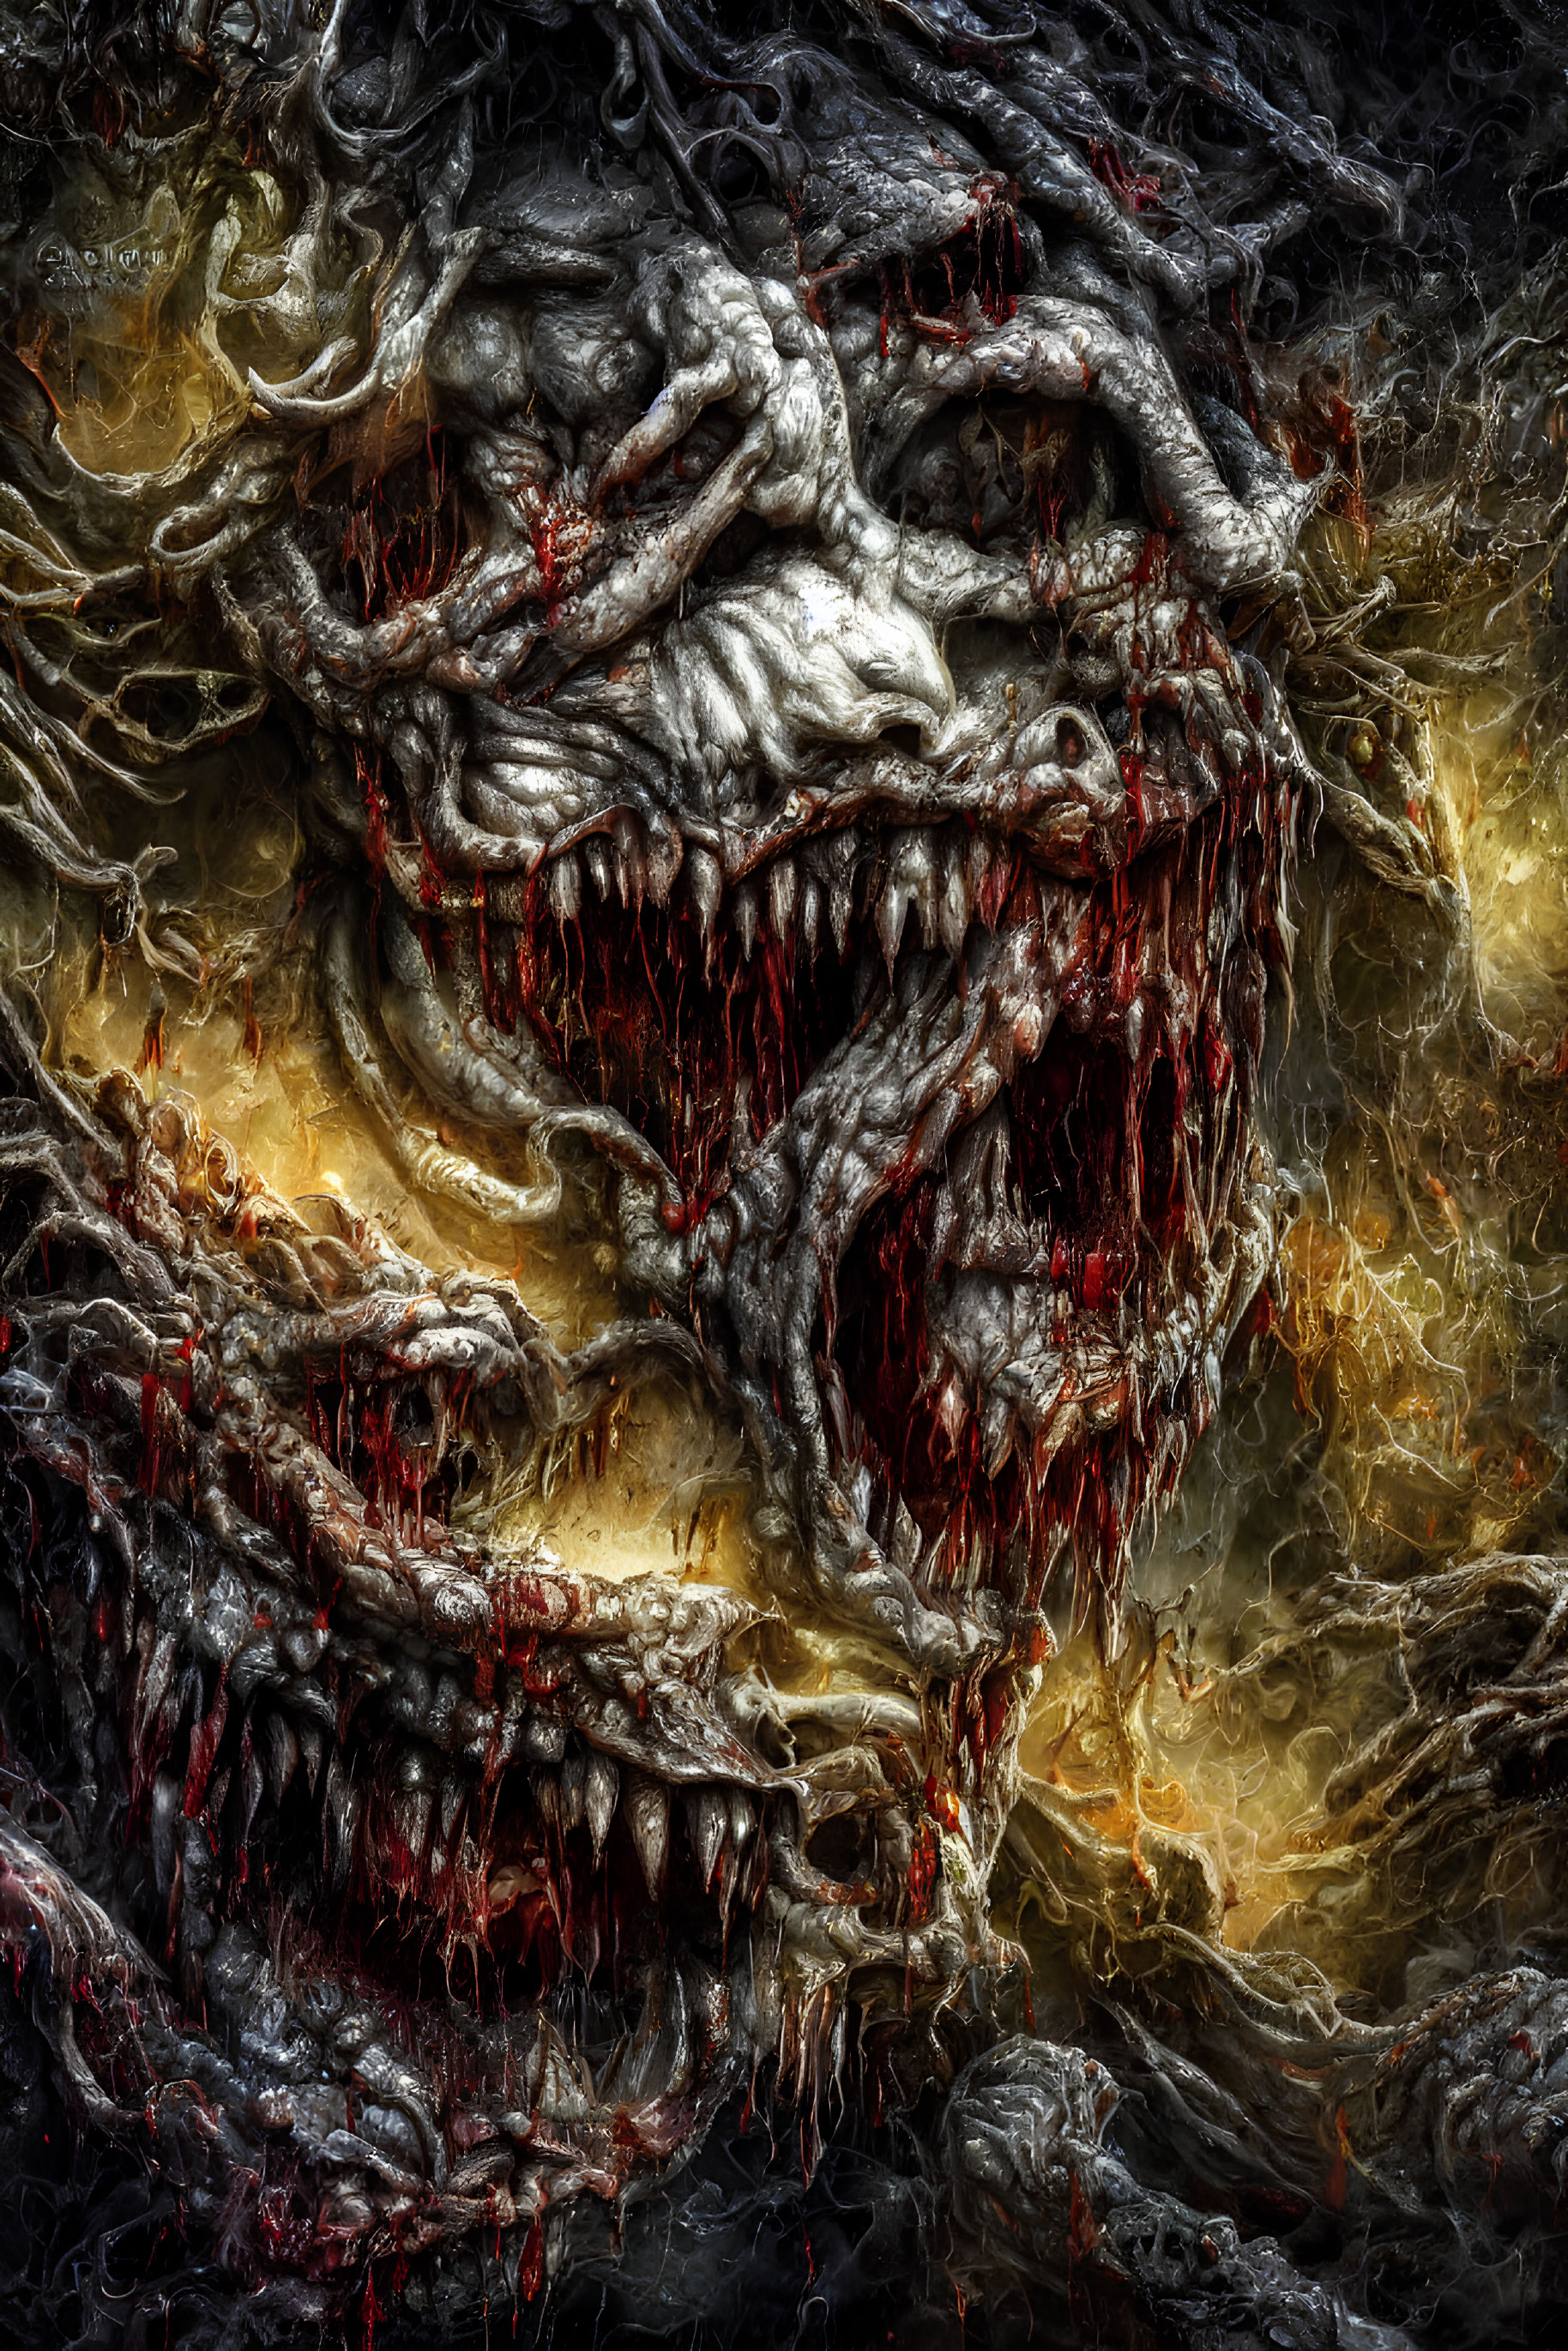 Dark fantasy artwork: Monstrous entity with fanged mouths & sinewy textures